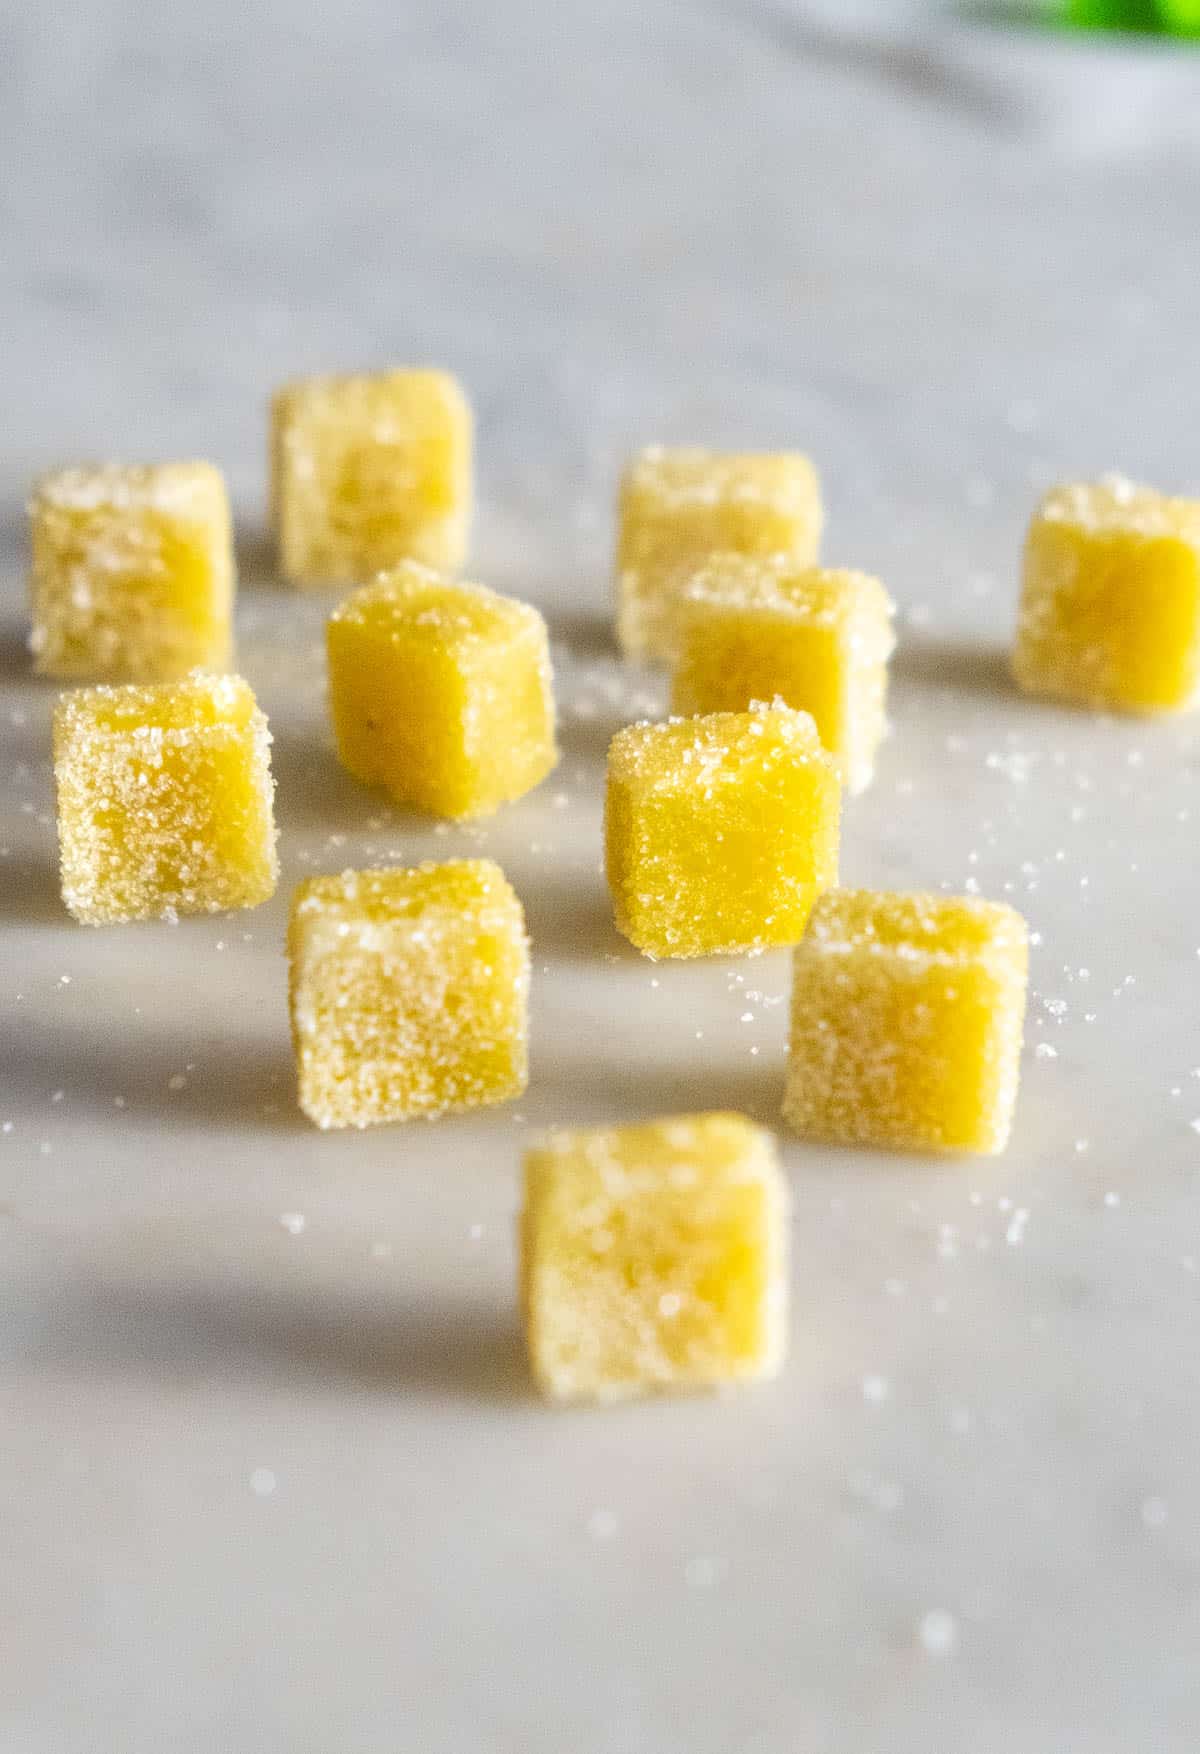 Bright yellow CBD gummies with a sour sugar coating.